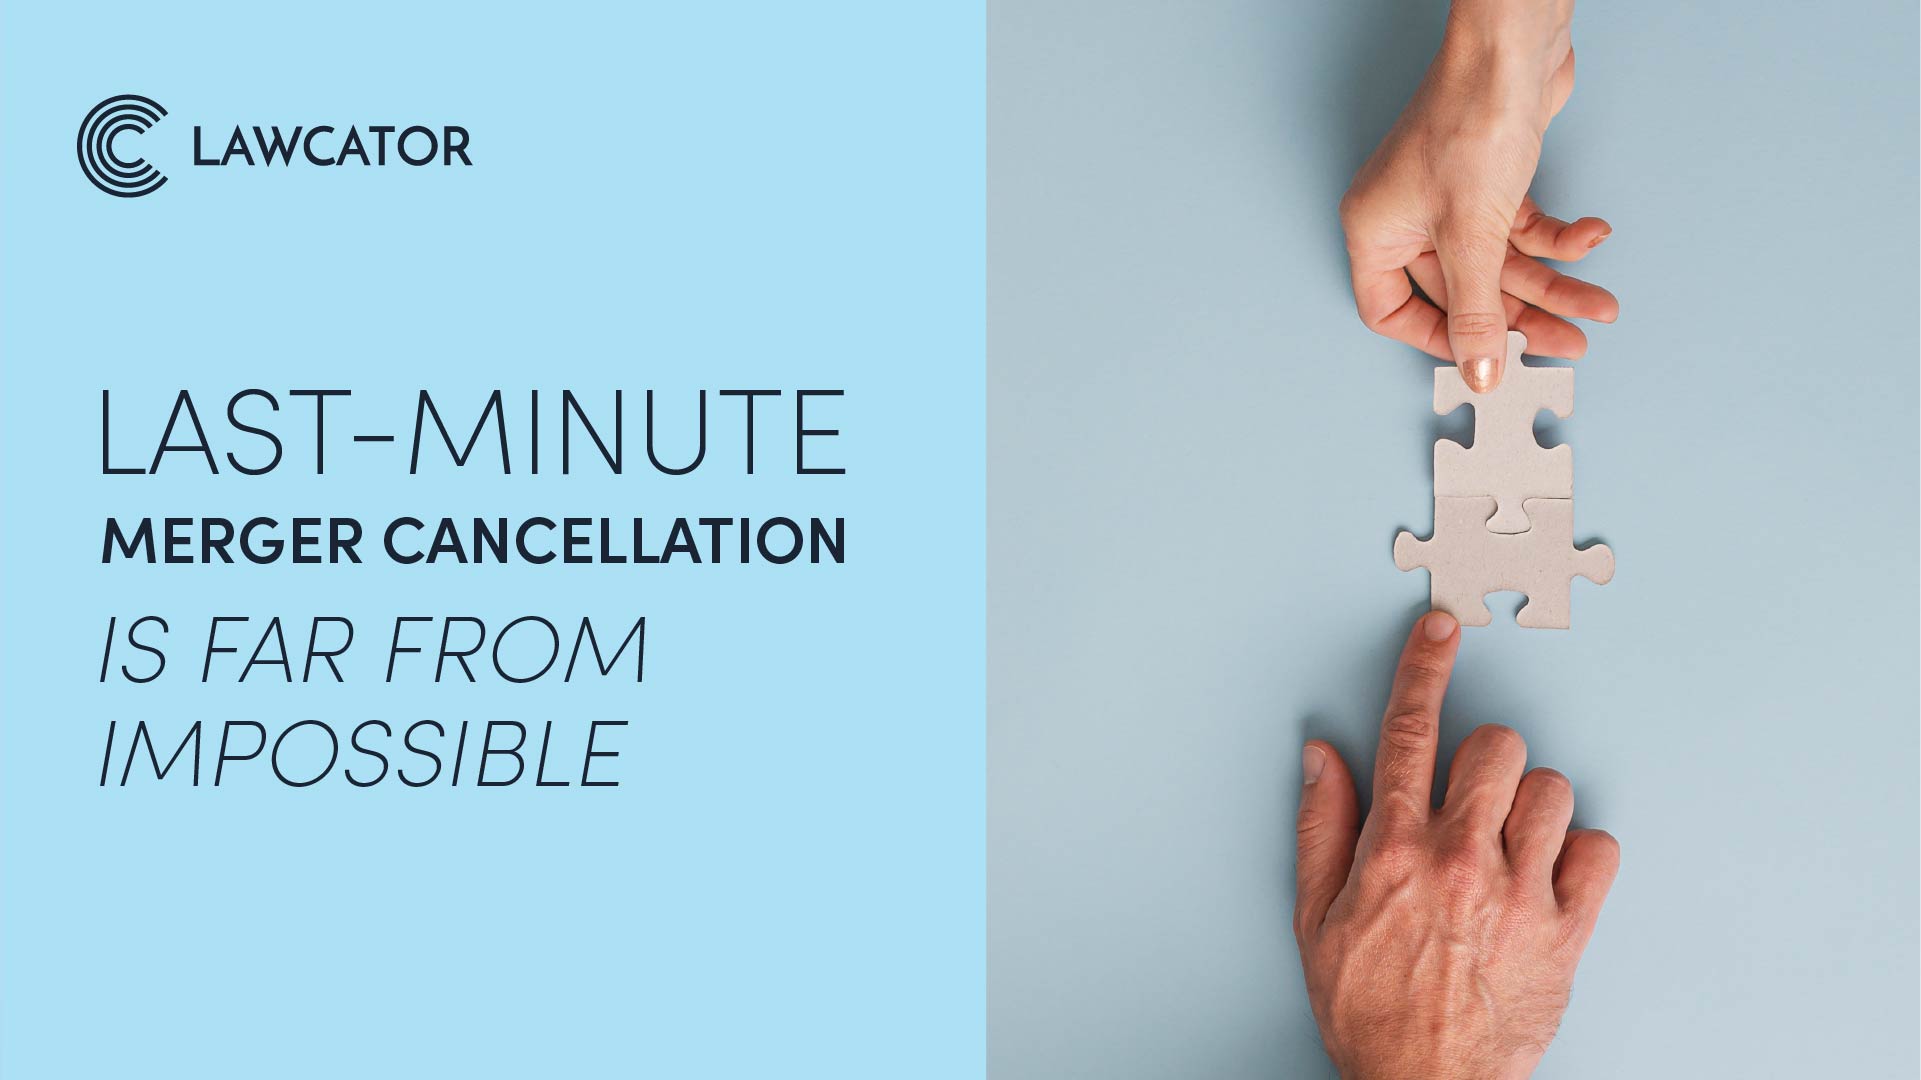 Last-Minute Merger Cancellation Is Far from Impossible